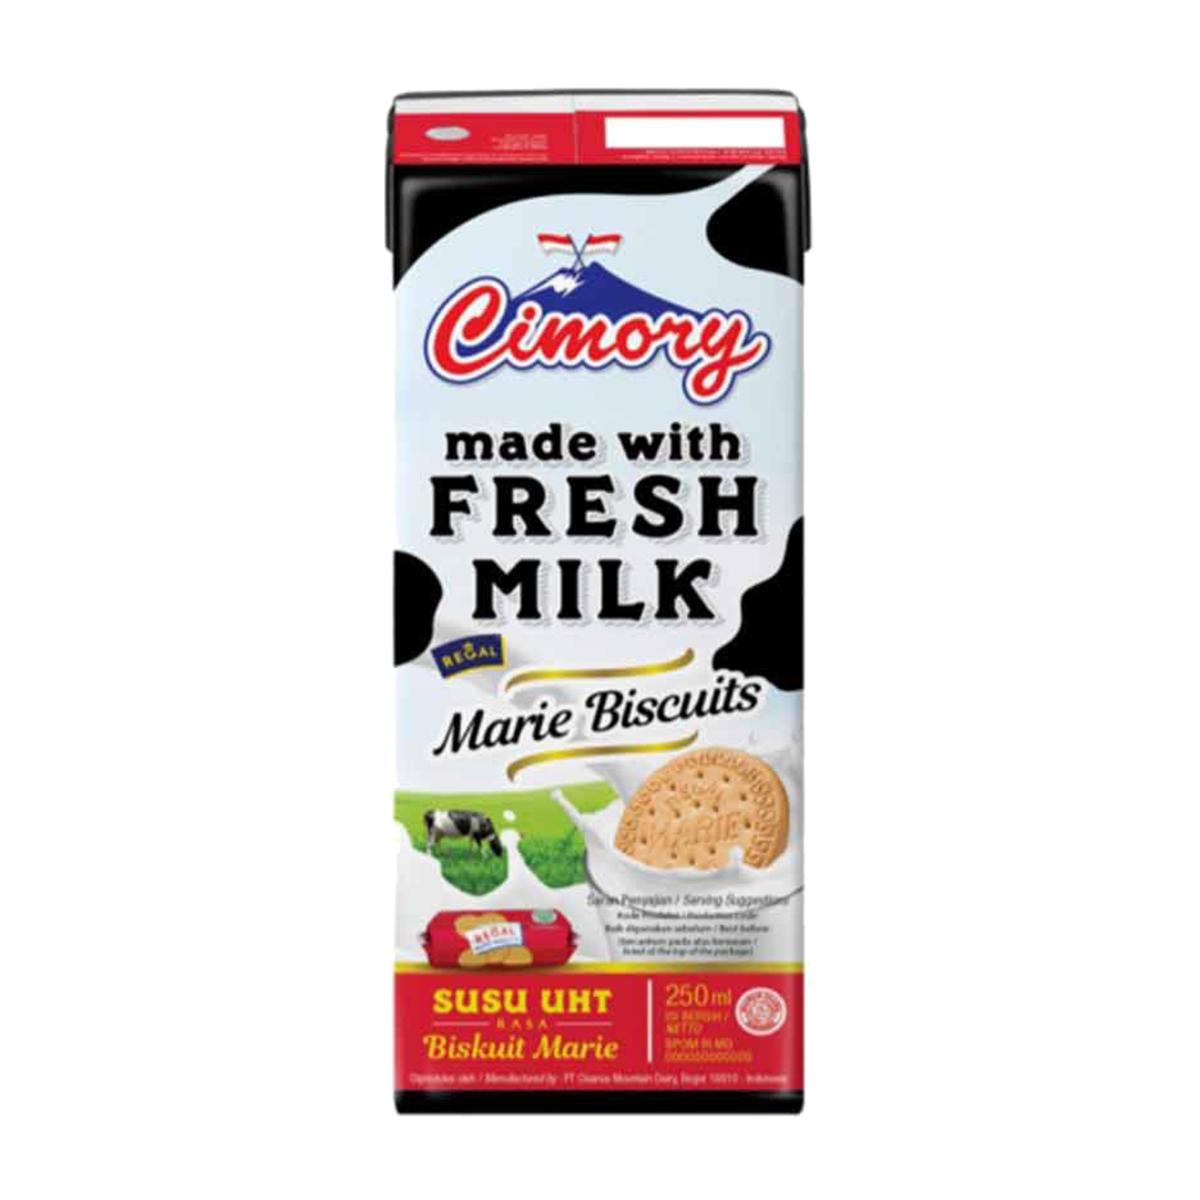 Cimory UHT Marie Biscuits 250ml